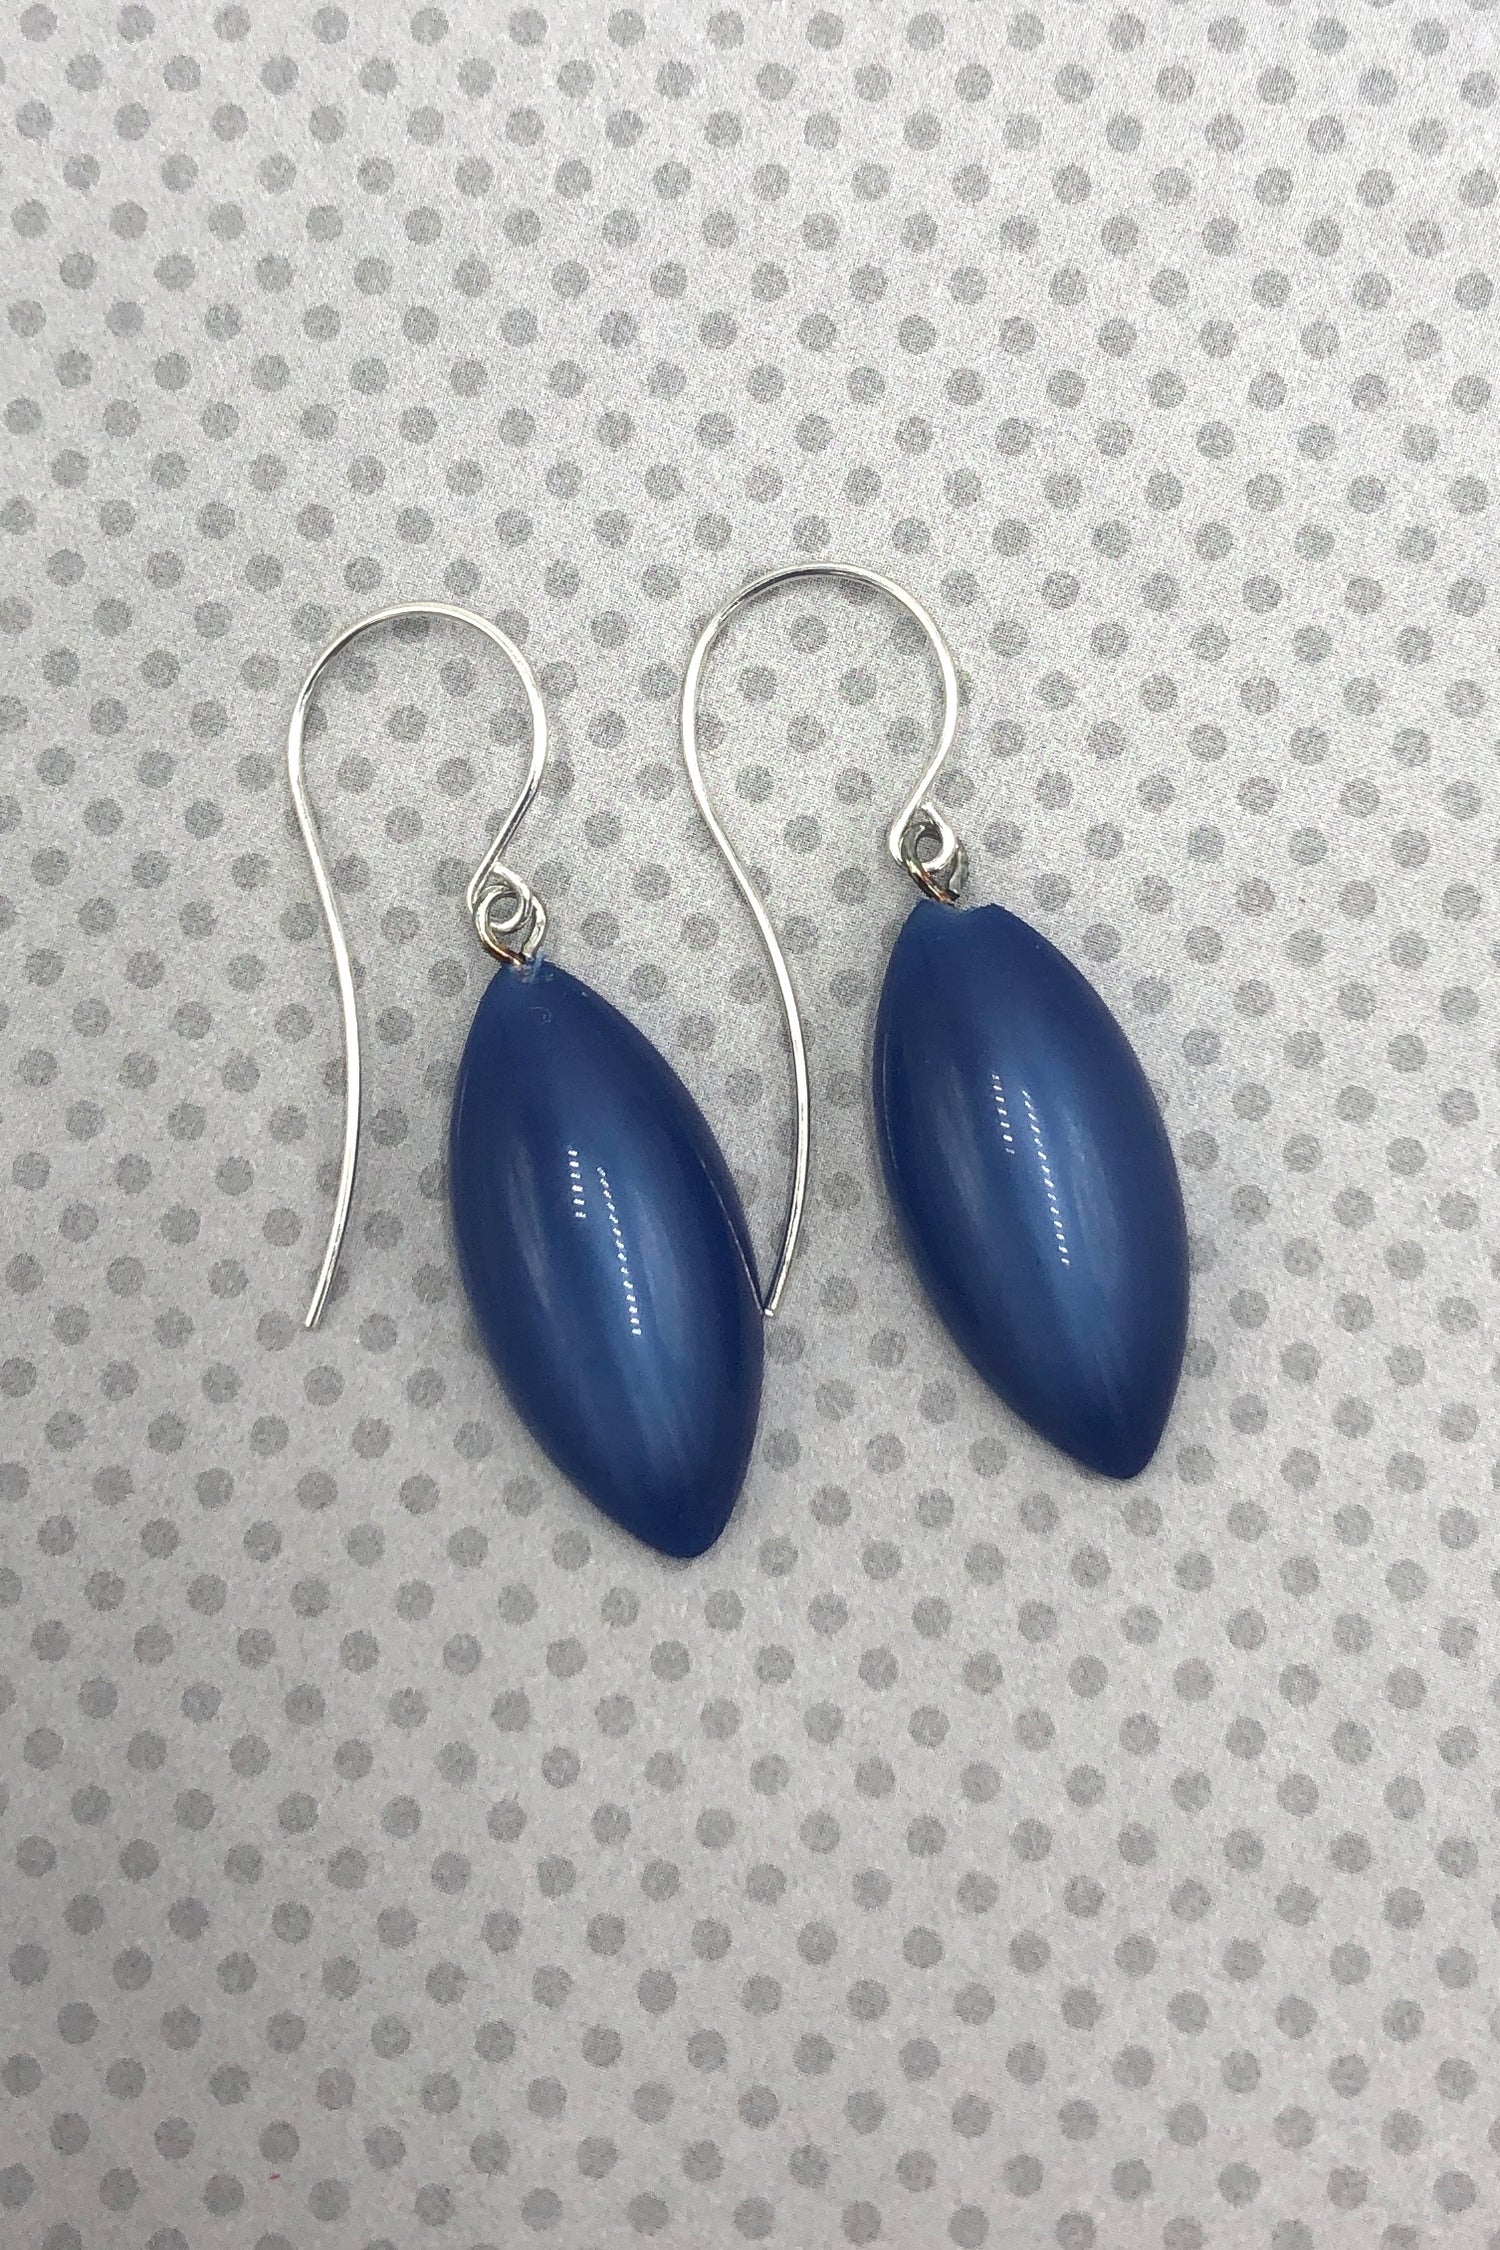 blue marquis shaped earring on fun bckground